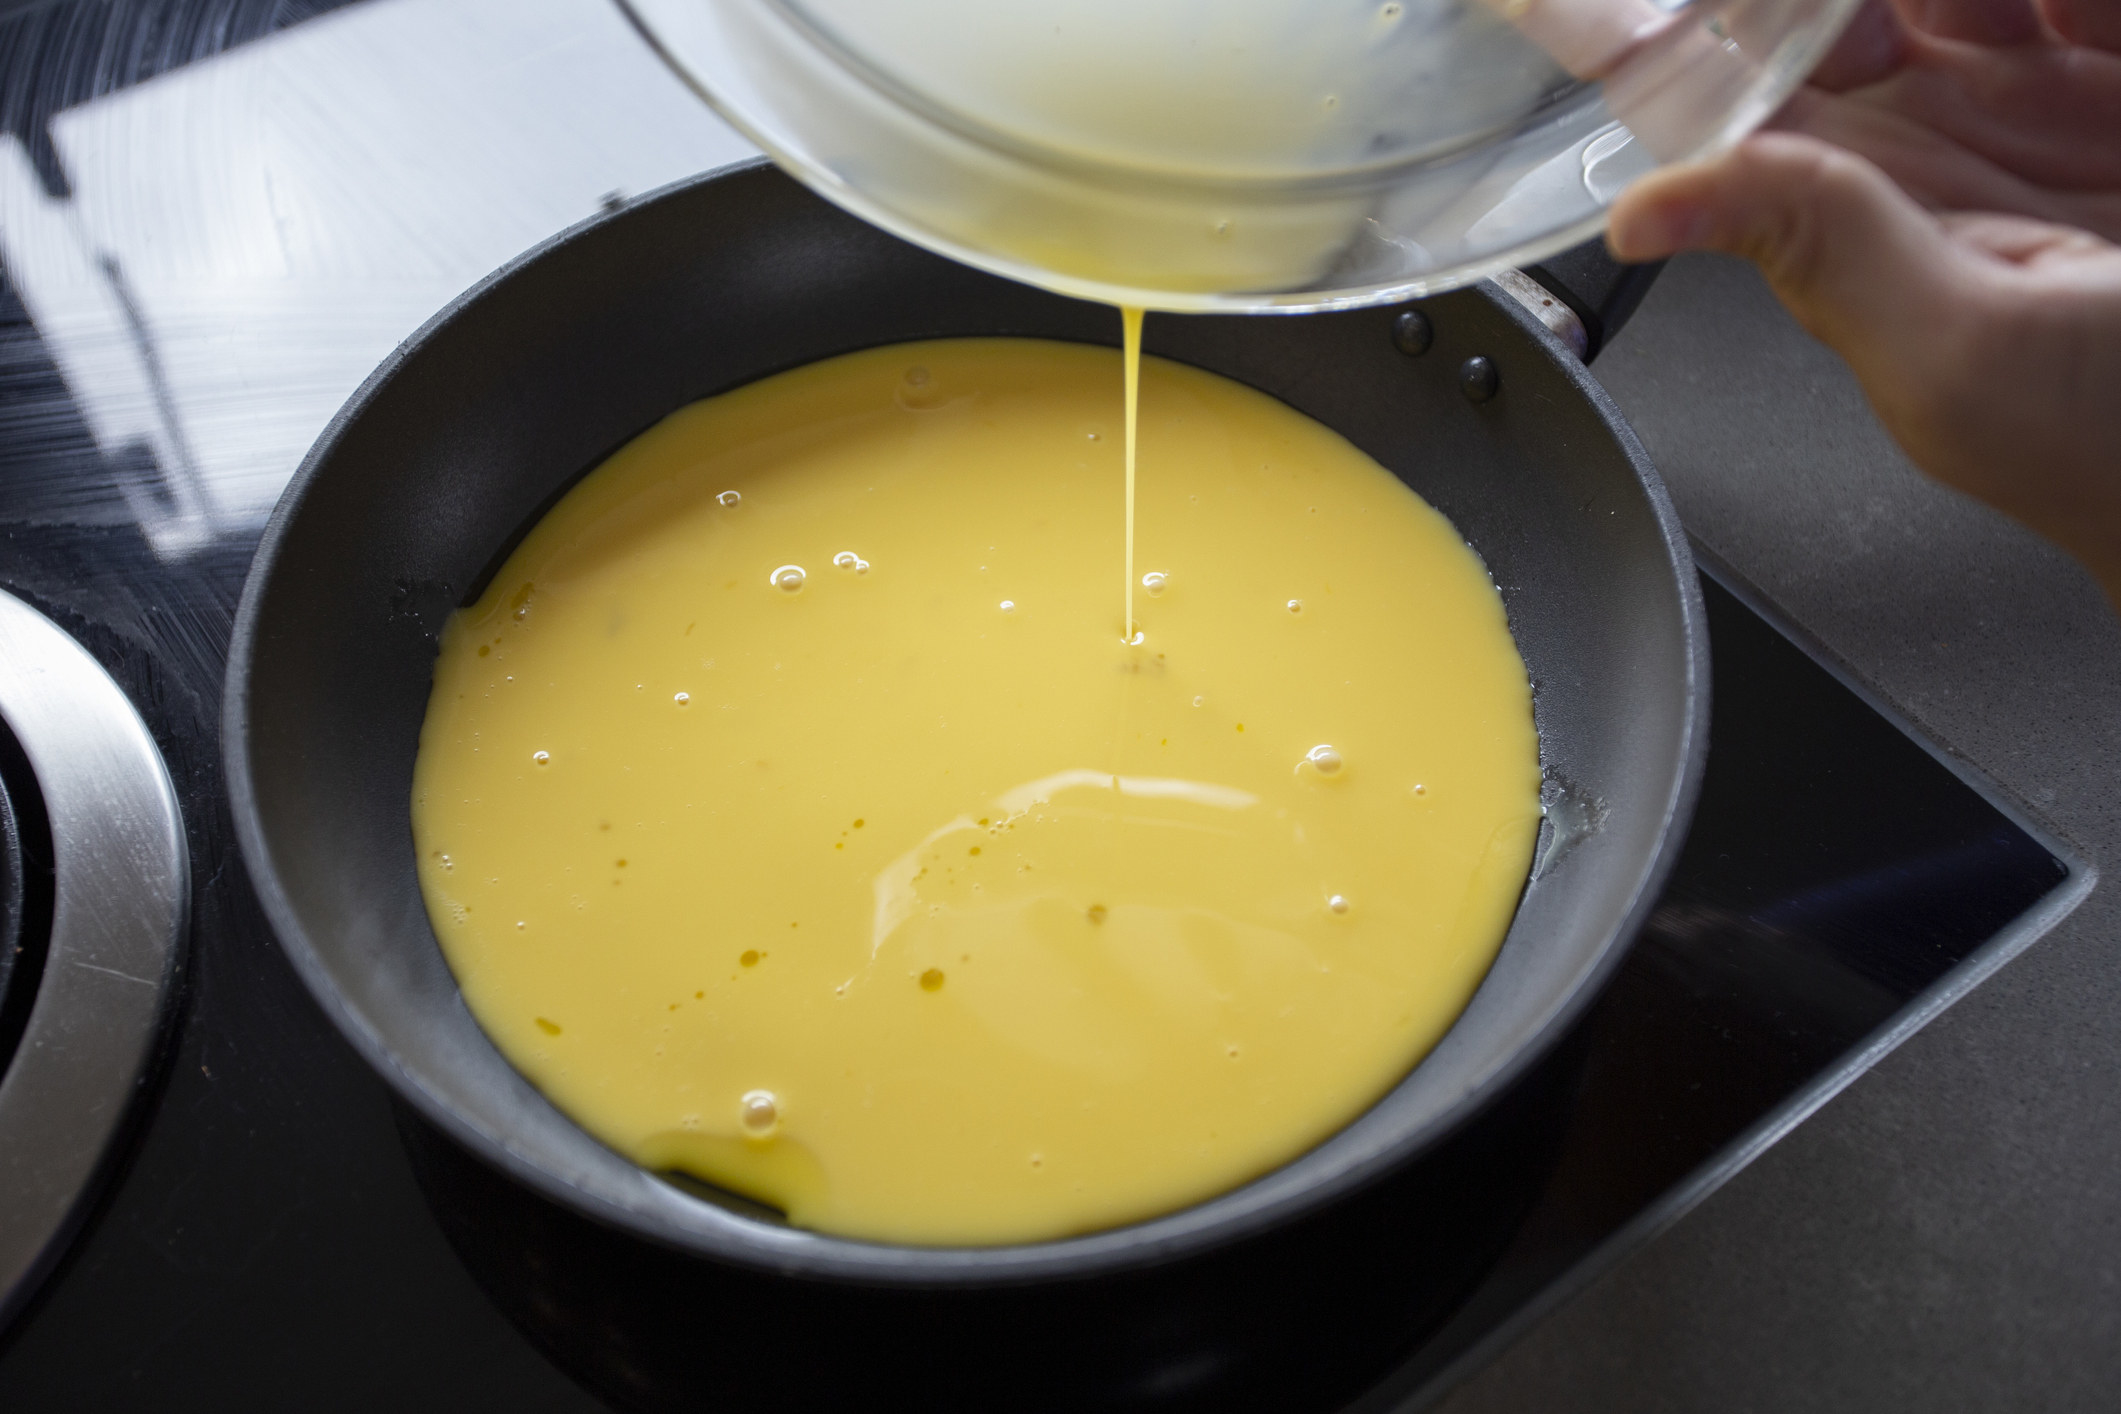 Pouring beaten eggs into a skillet.